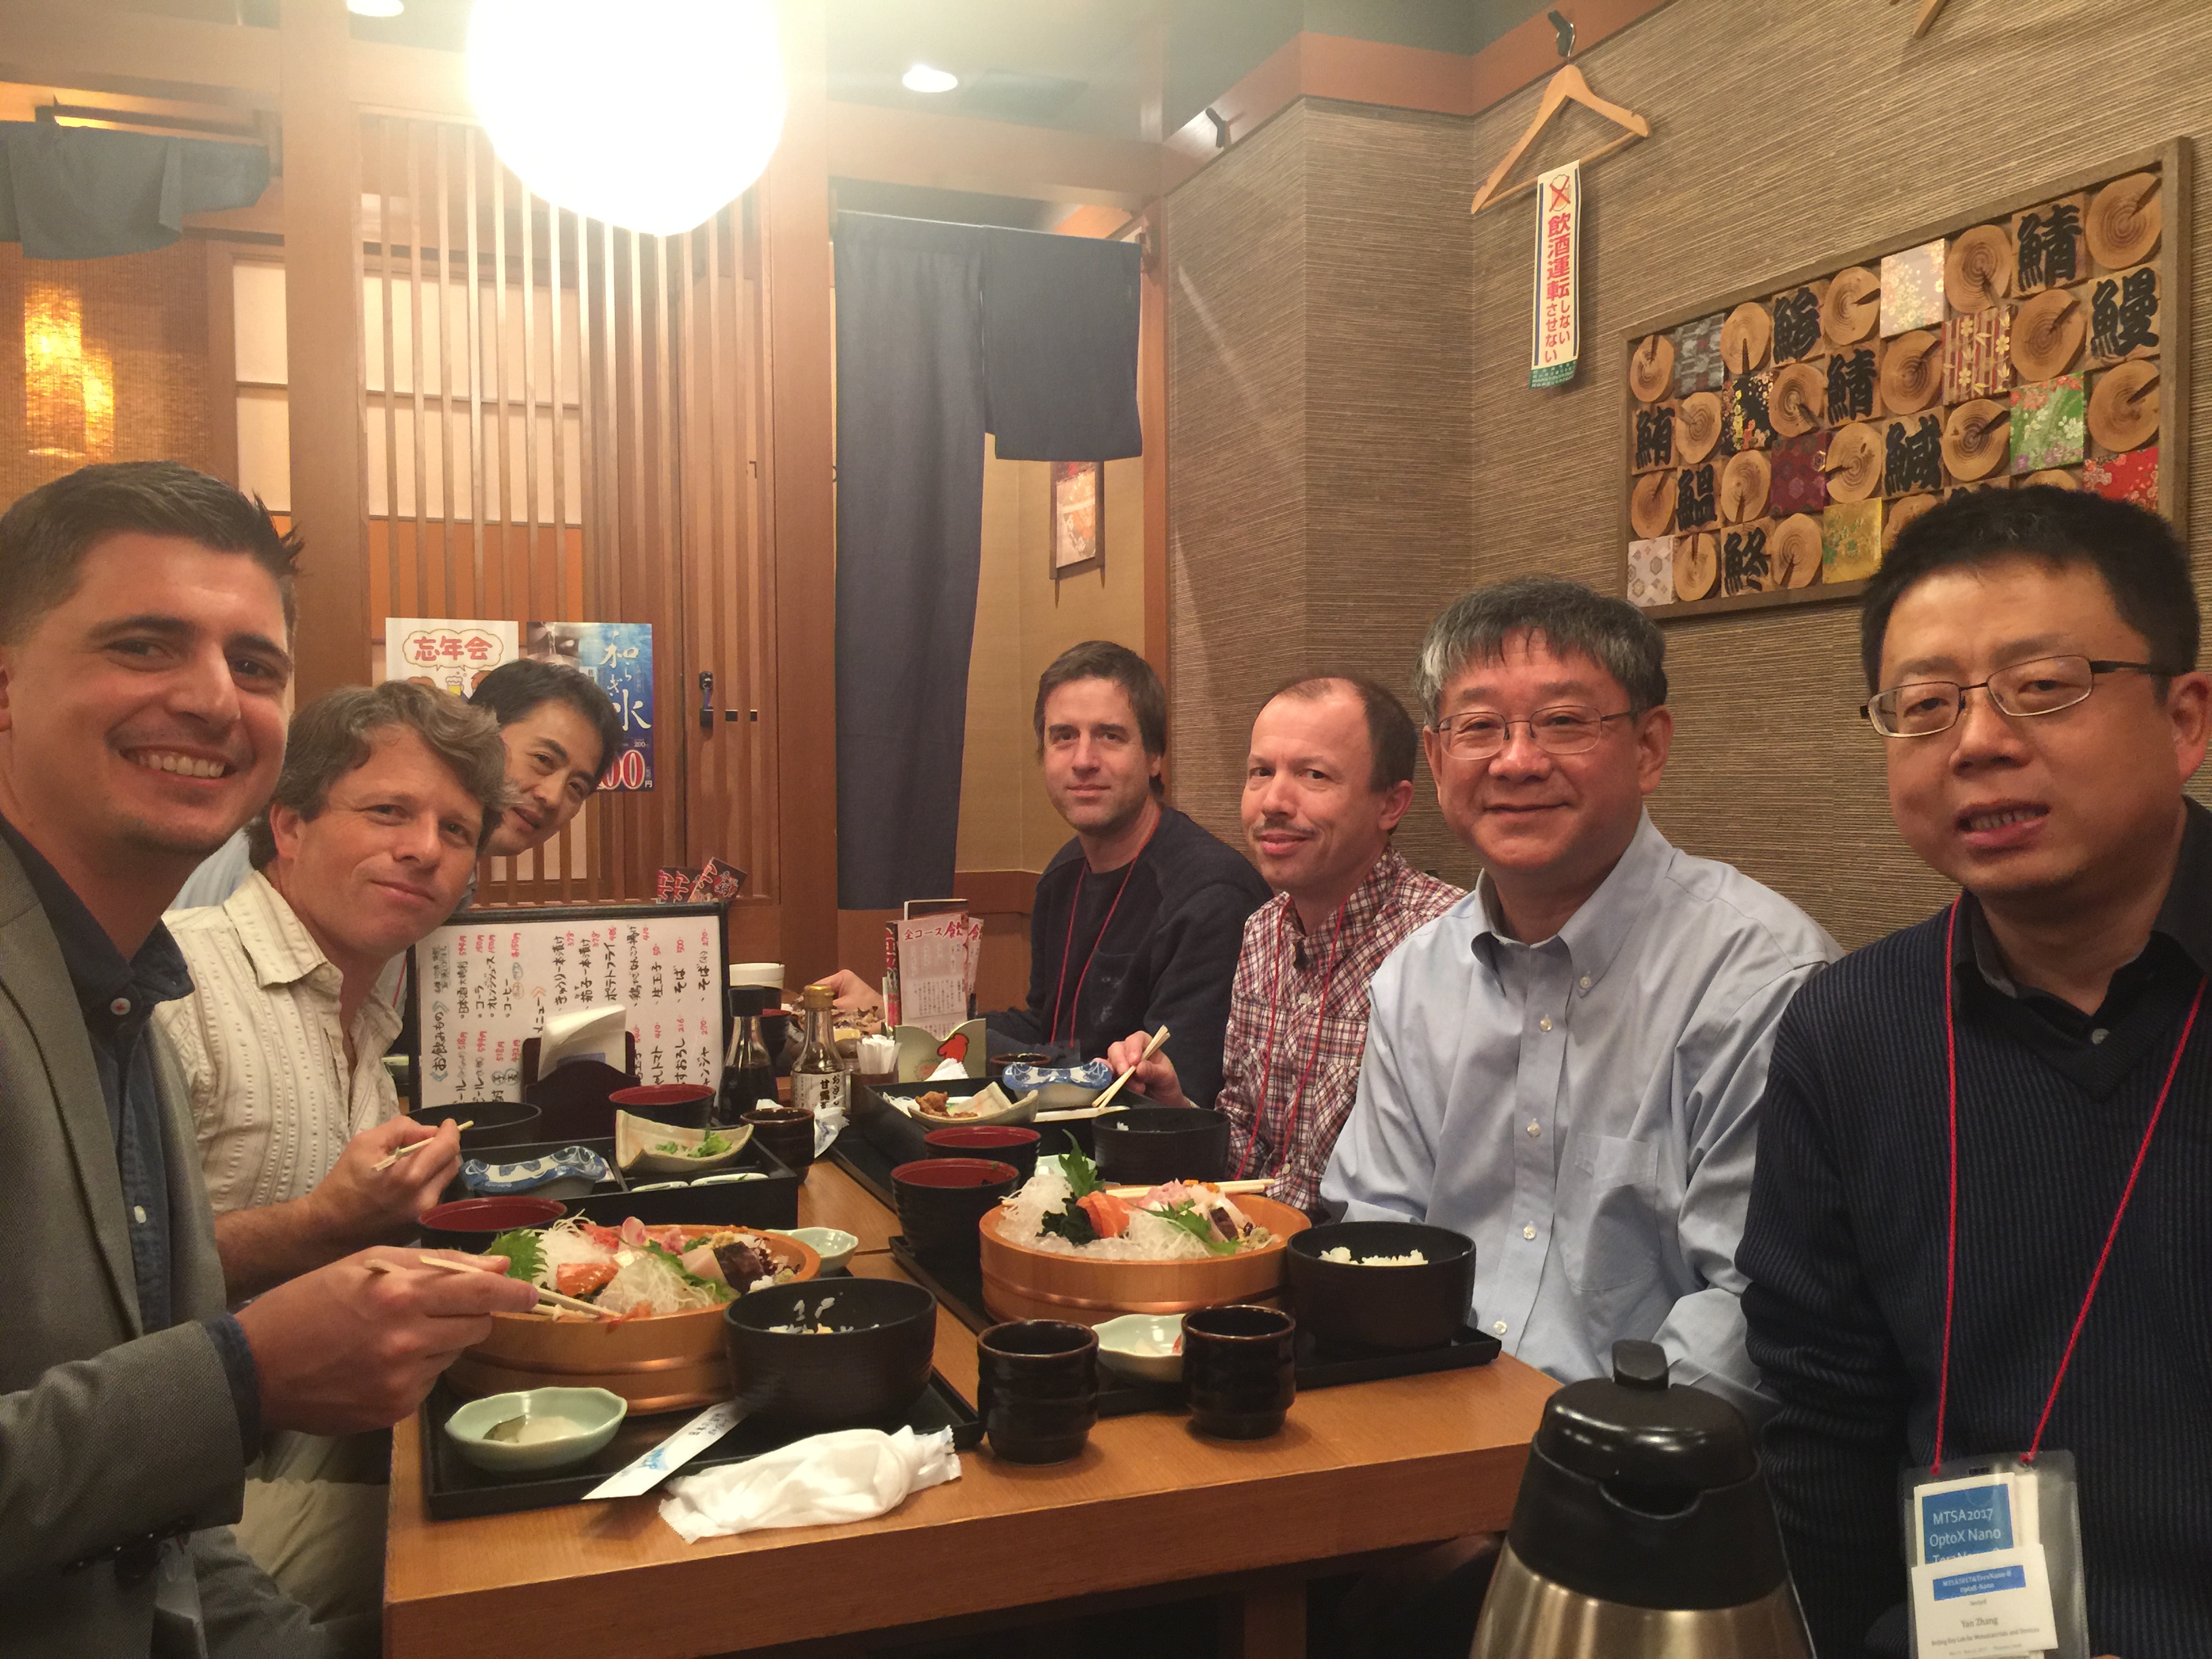 Mike (left) having lunch with good friends and colleagues, including Dan Mittleman (Brown),  Tsuneyuki Ozaki (INRS), Petr Kužel (Academy of Sciences of the Czech Republic), and X. -C. Zhang (Rochester)